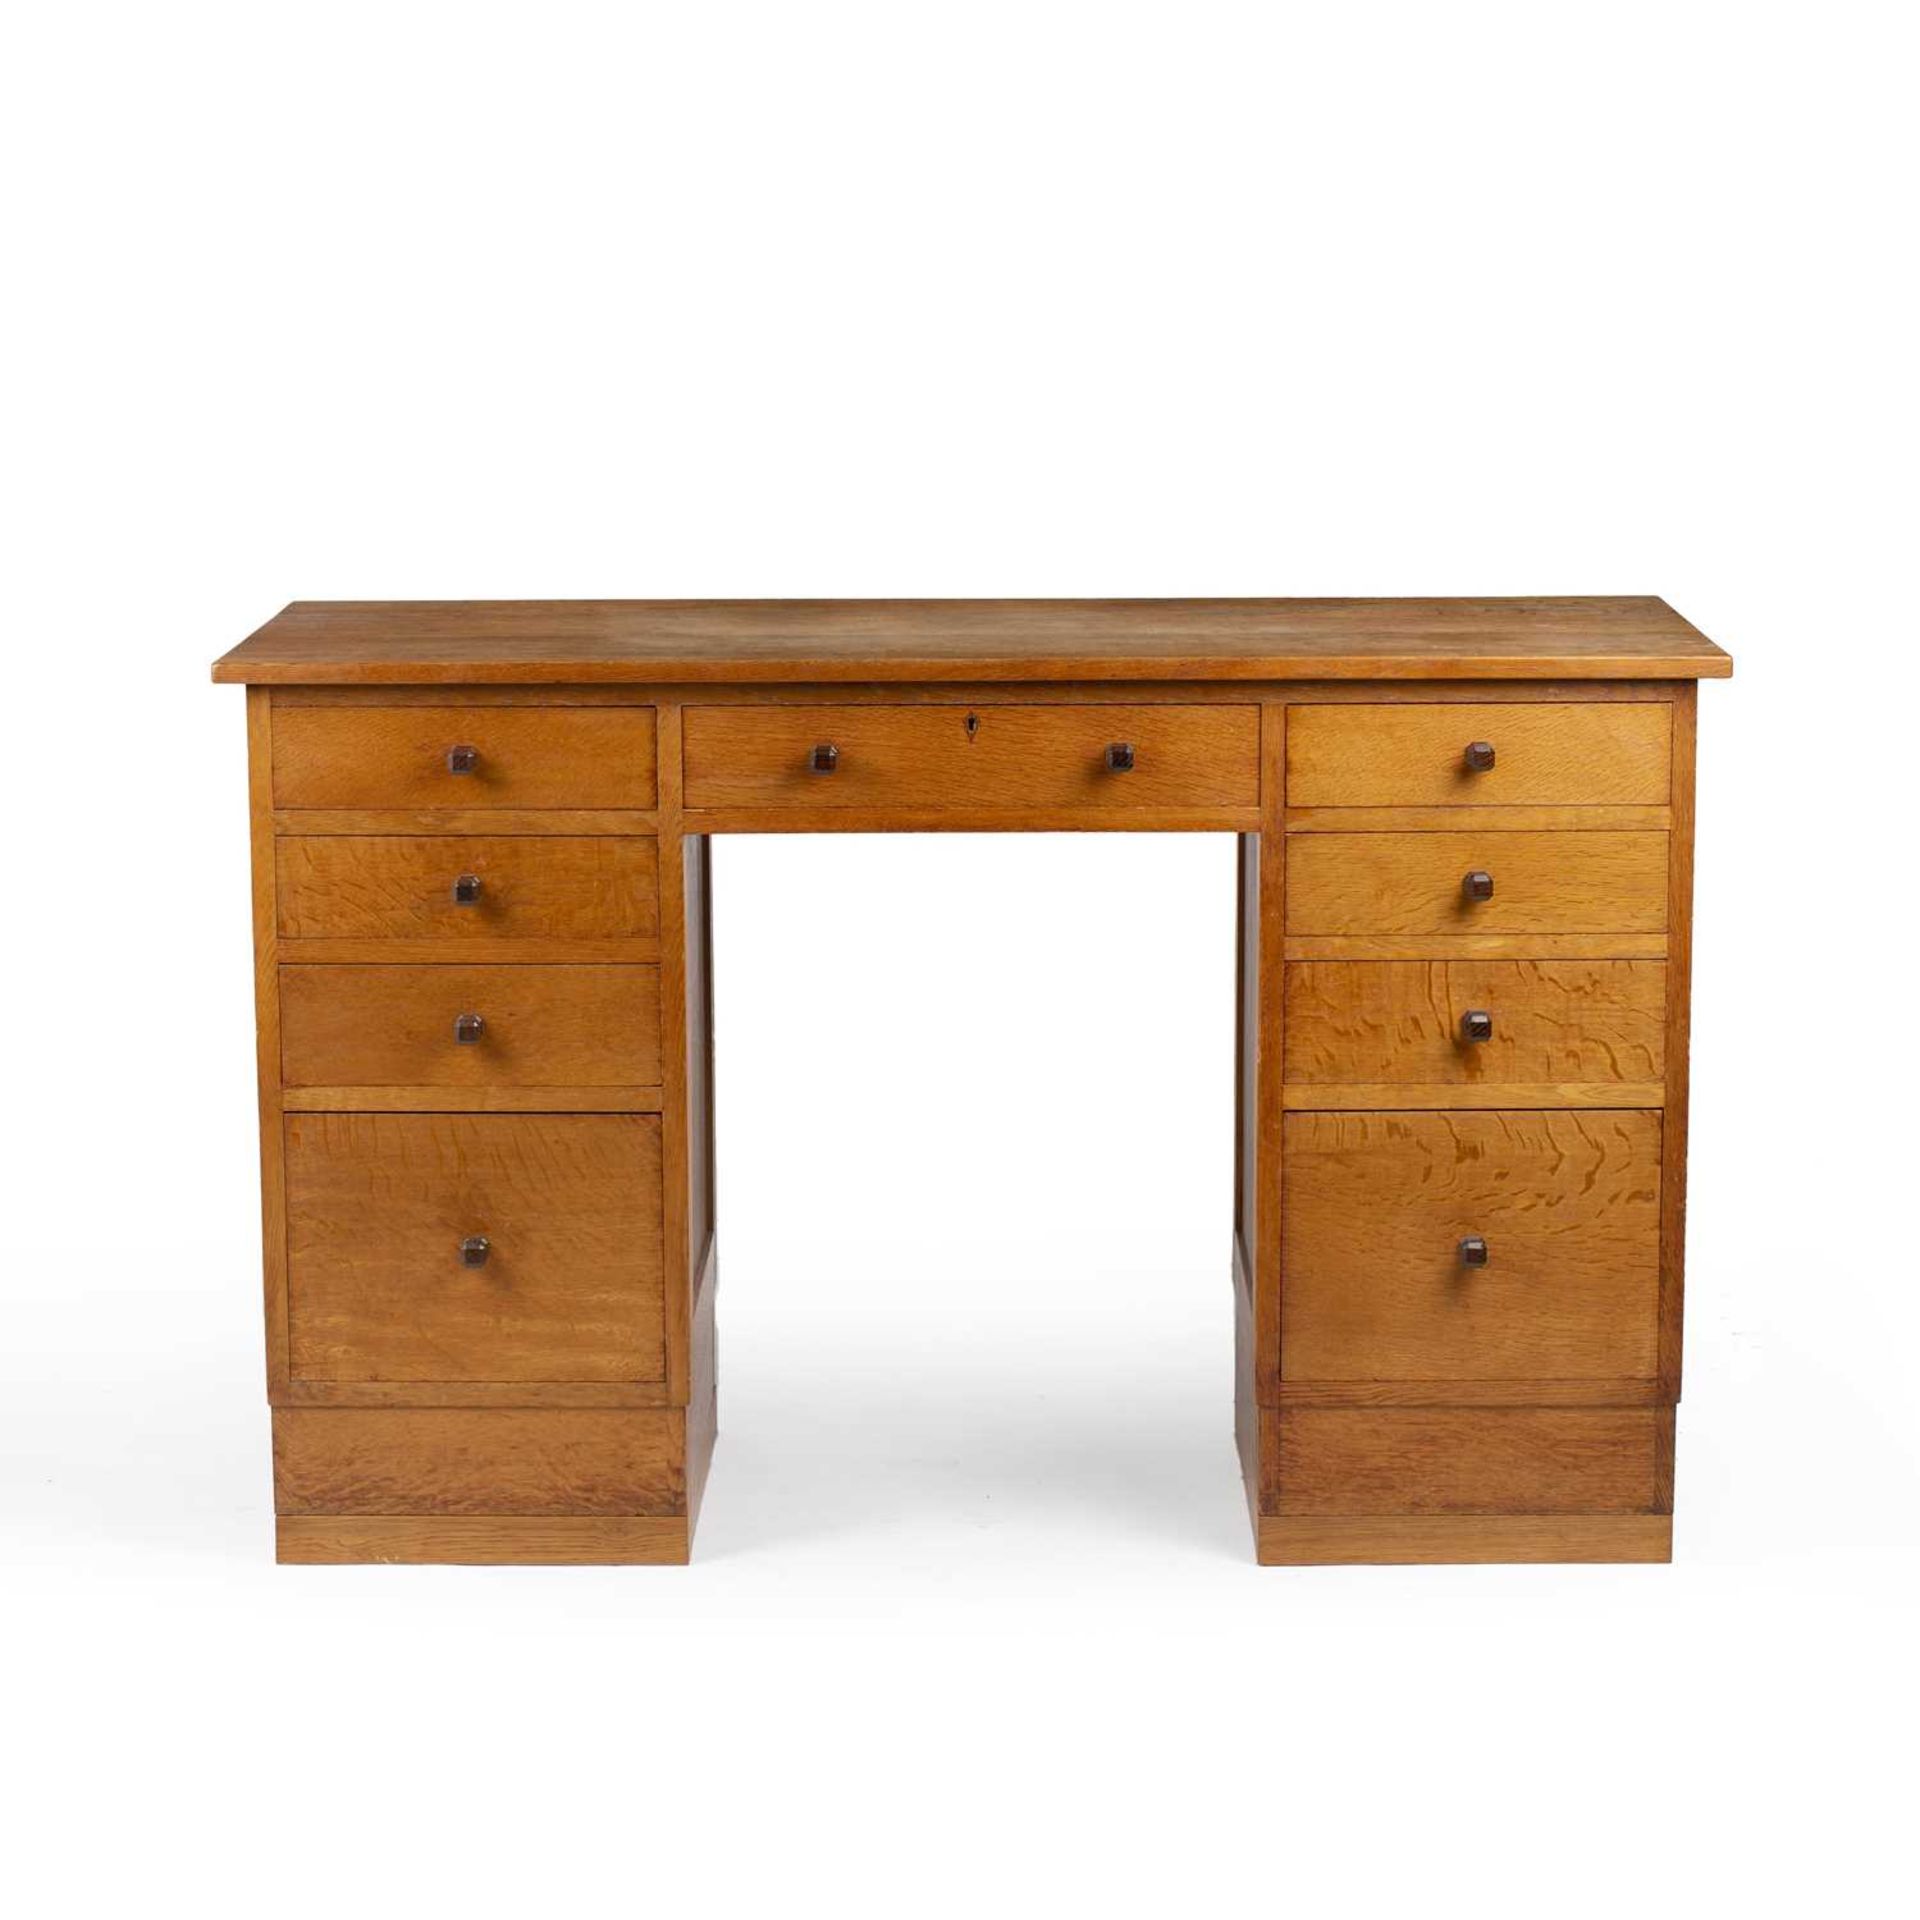 Gordon Russell (1892-1980) Desk, circa 1930 oak, with nine fitted drawers, each with carved